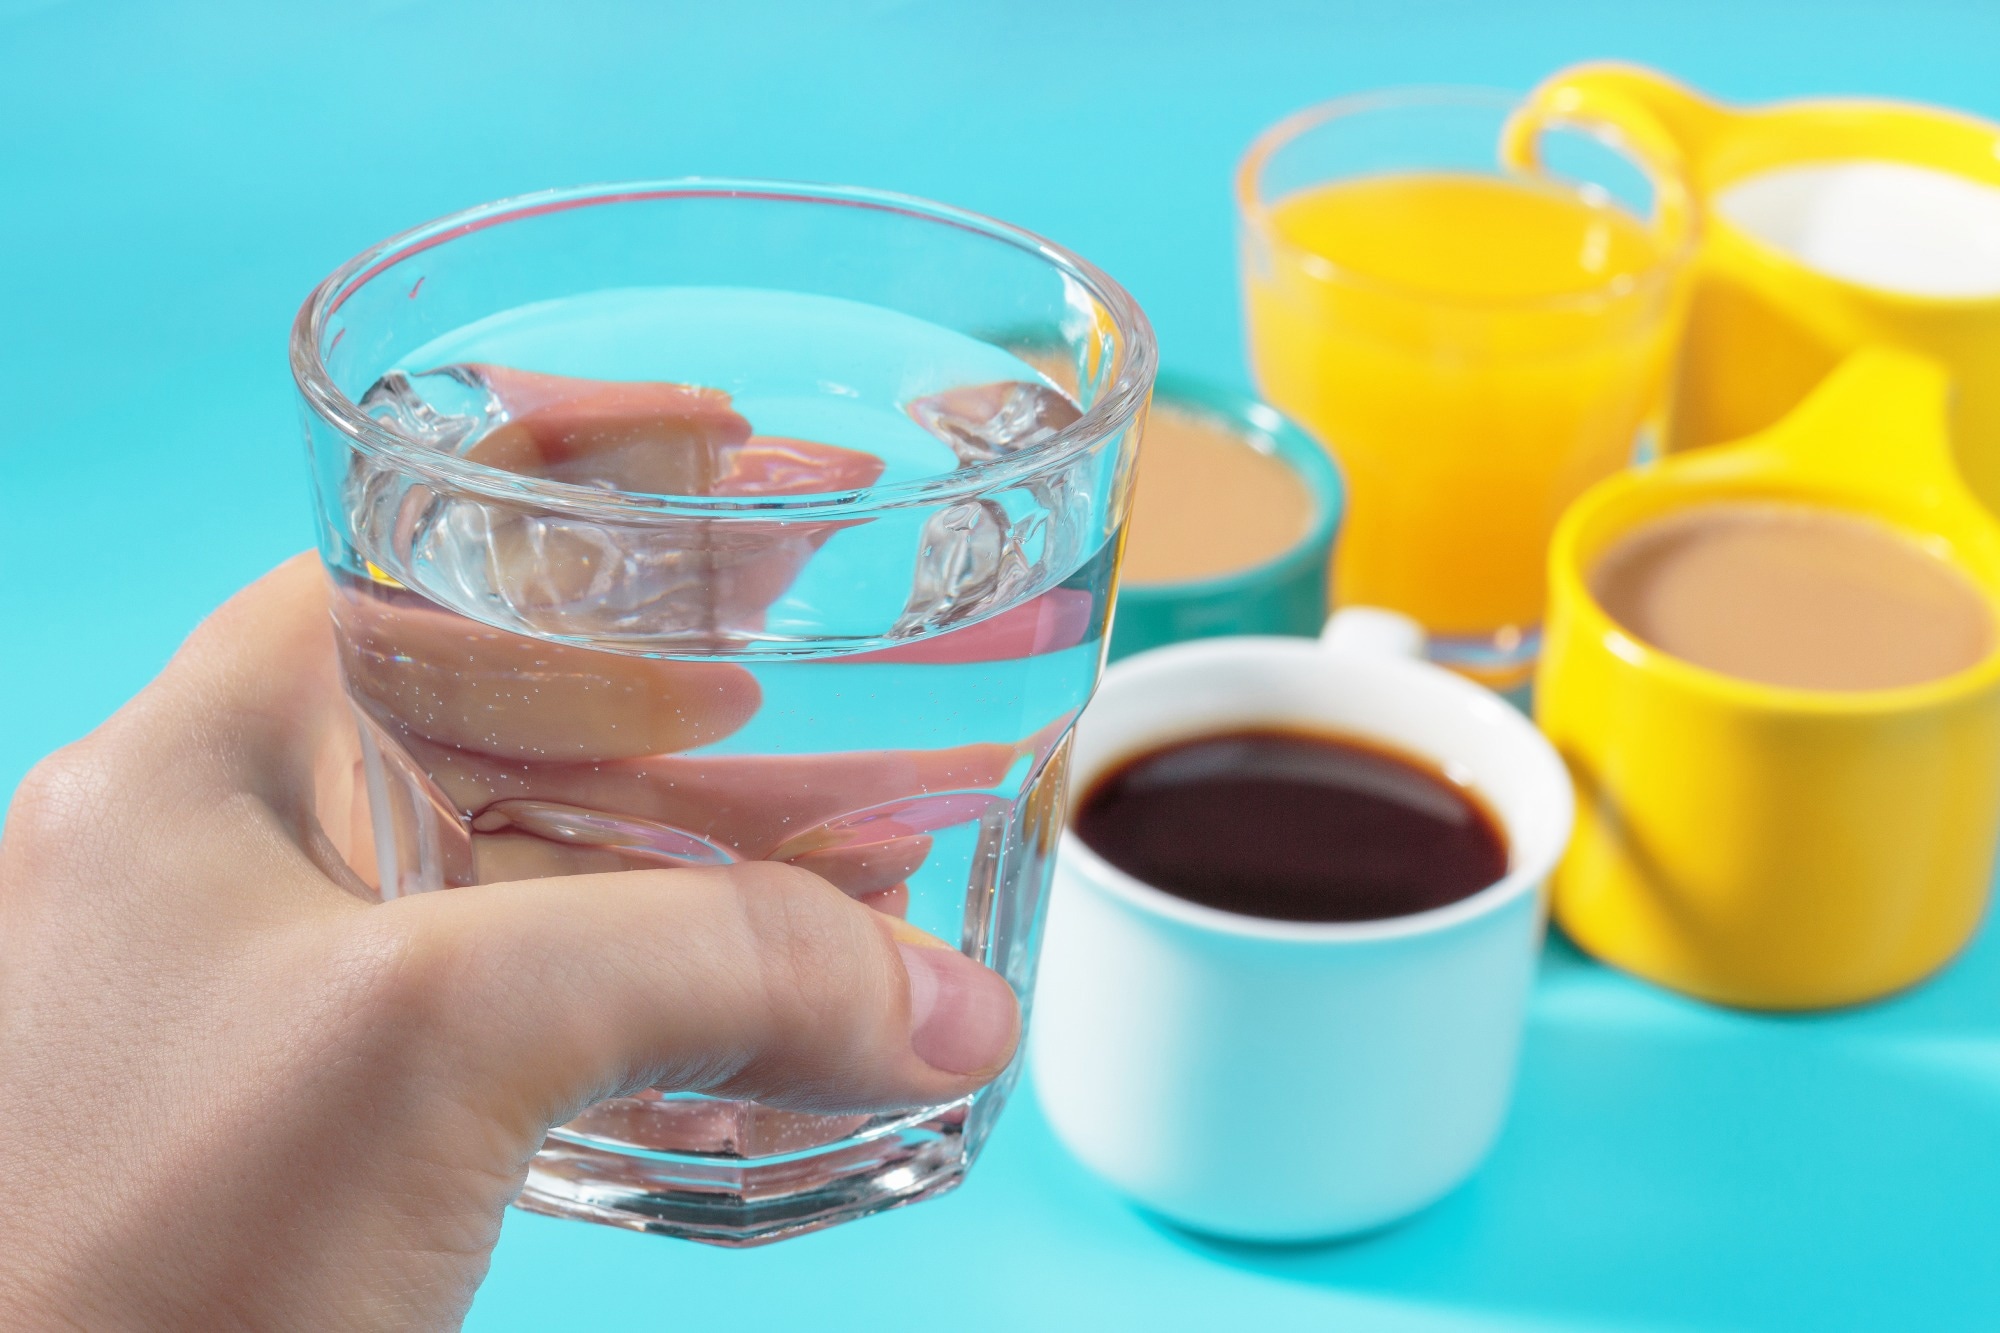 Study: Non-nutritive sweetened beverages versus water after a 52-week weight management programme: a randomised controlled trial. Image Credit: TanyaKim/Shutterstock.com